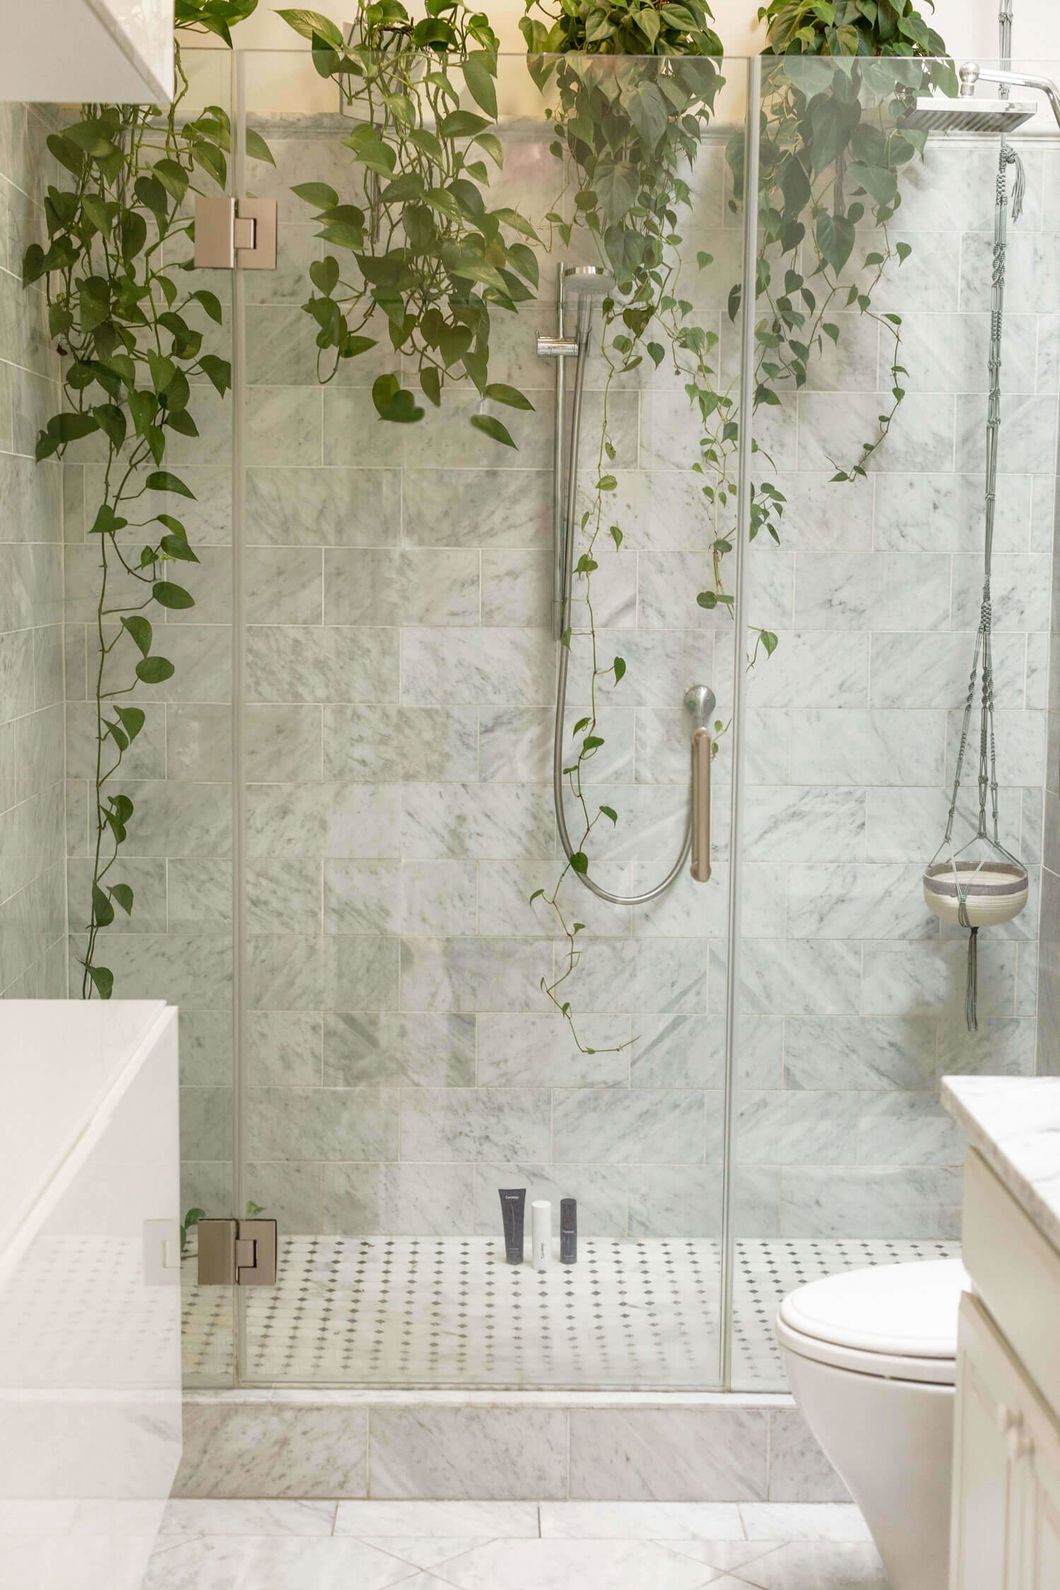 Bathroom featuring a tiled shower and flooring with decorative plants